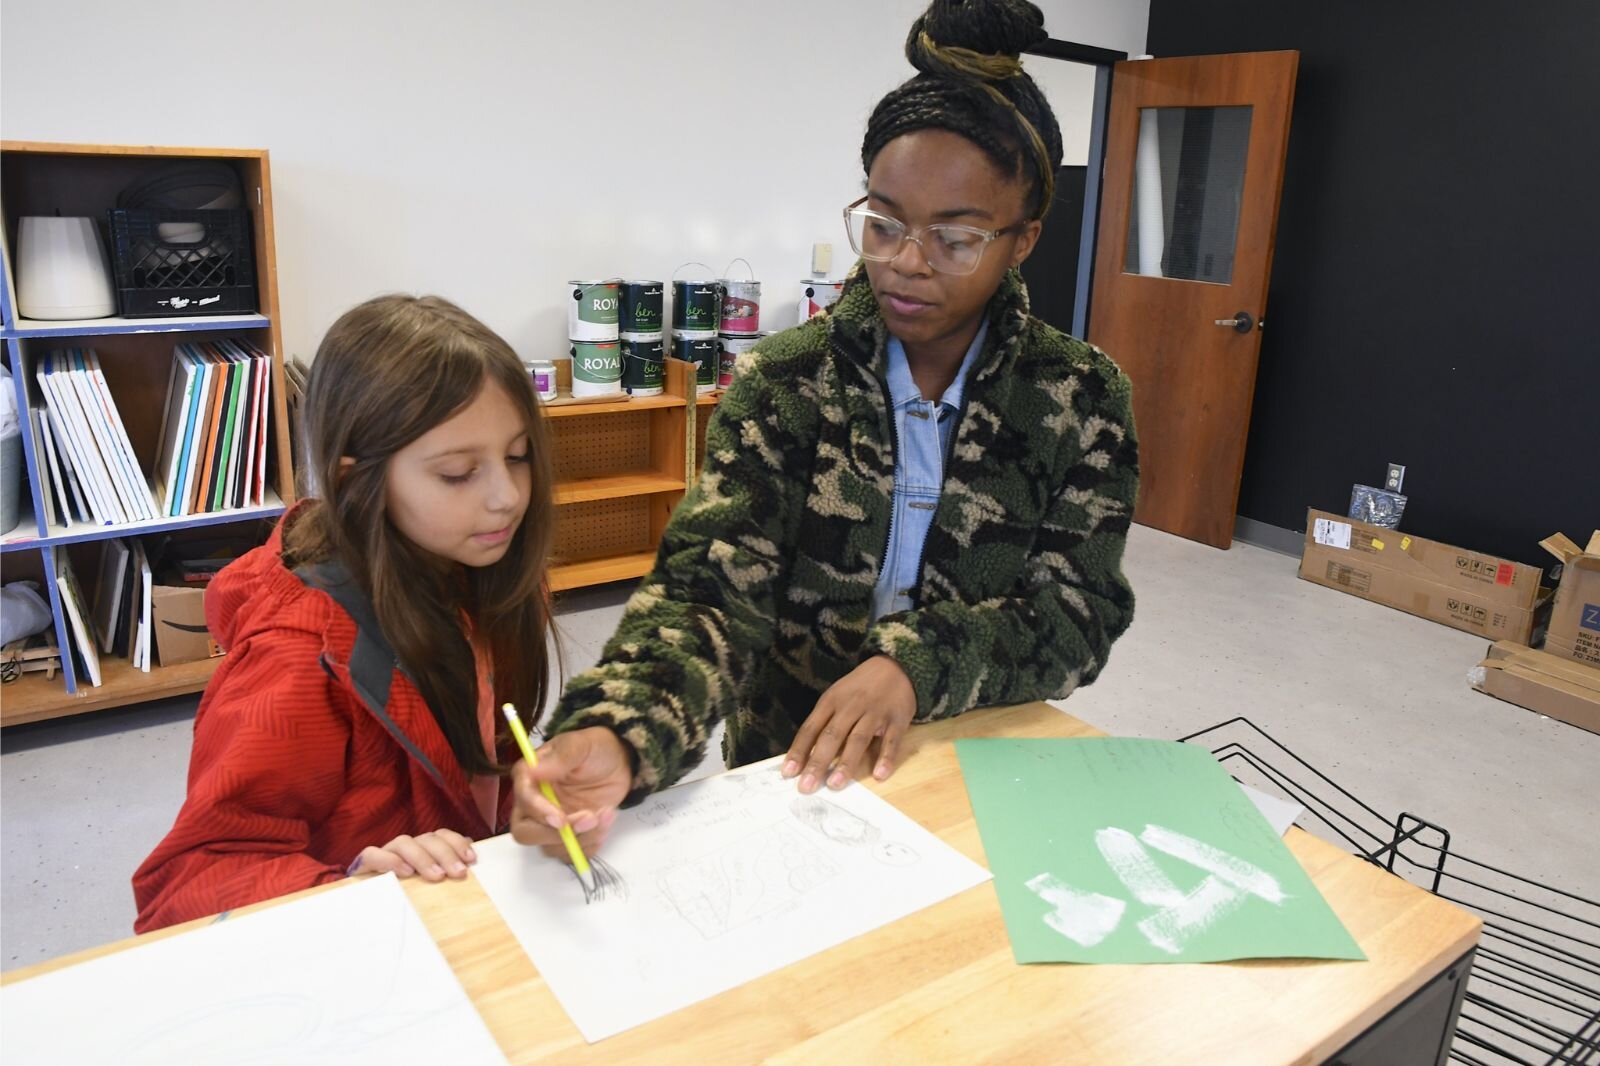 Jamari Taylor, right, works with one of her students, Cora Vance.